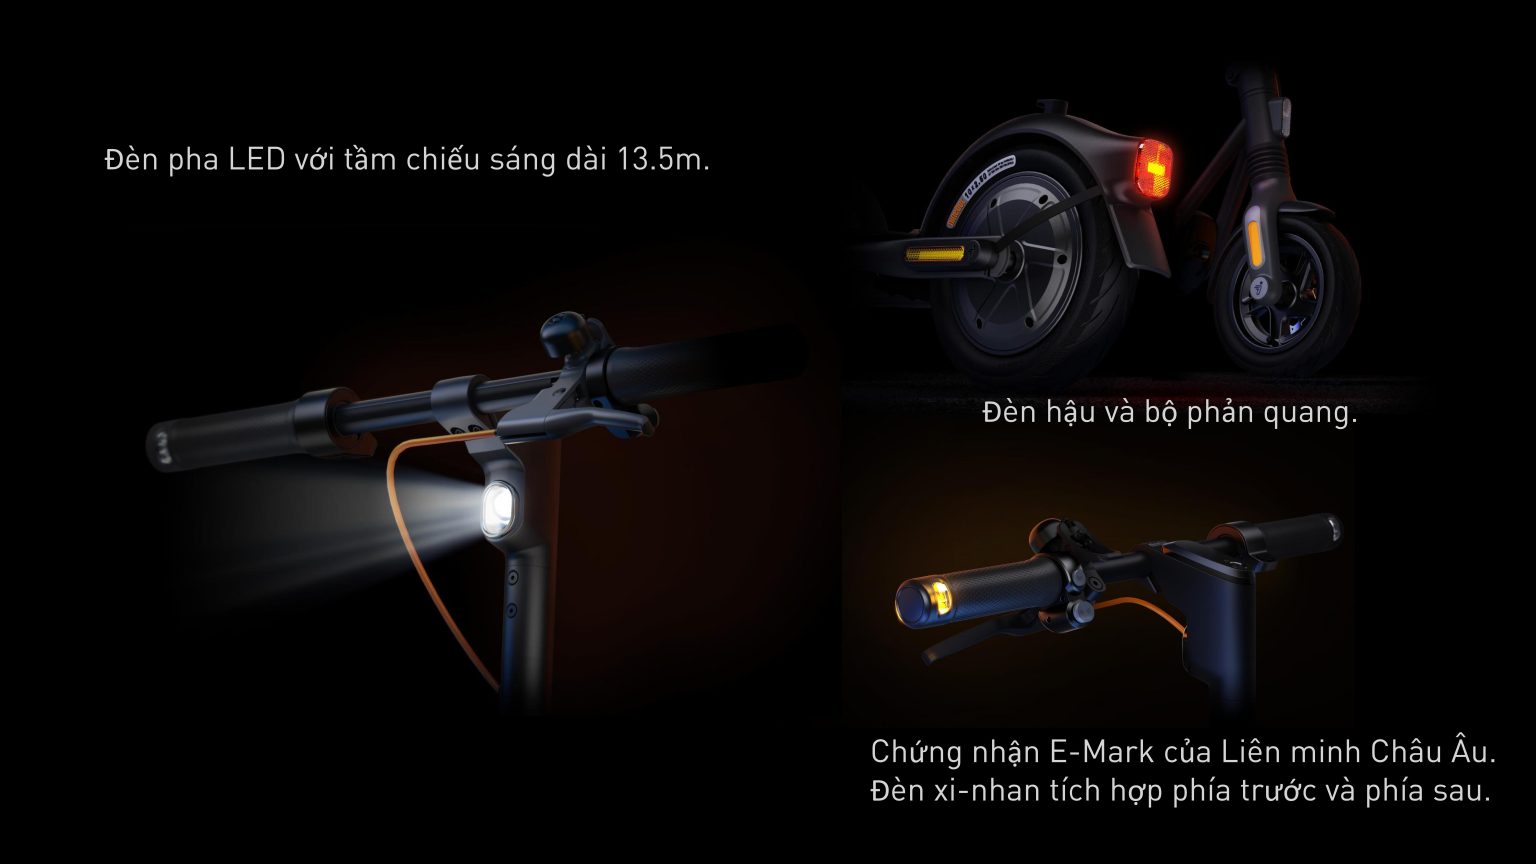 Xe điện Scooter Segway Ninebot F2